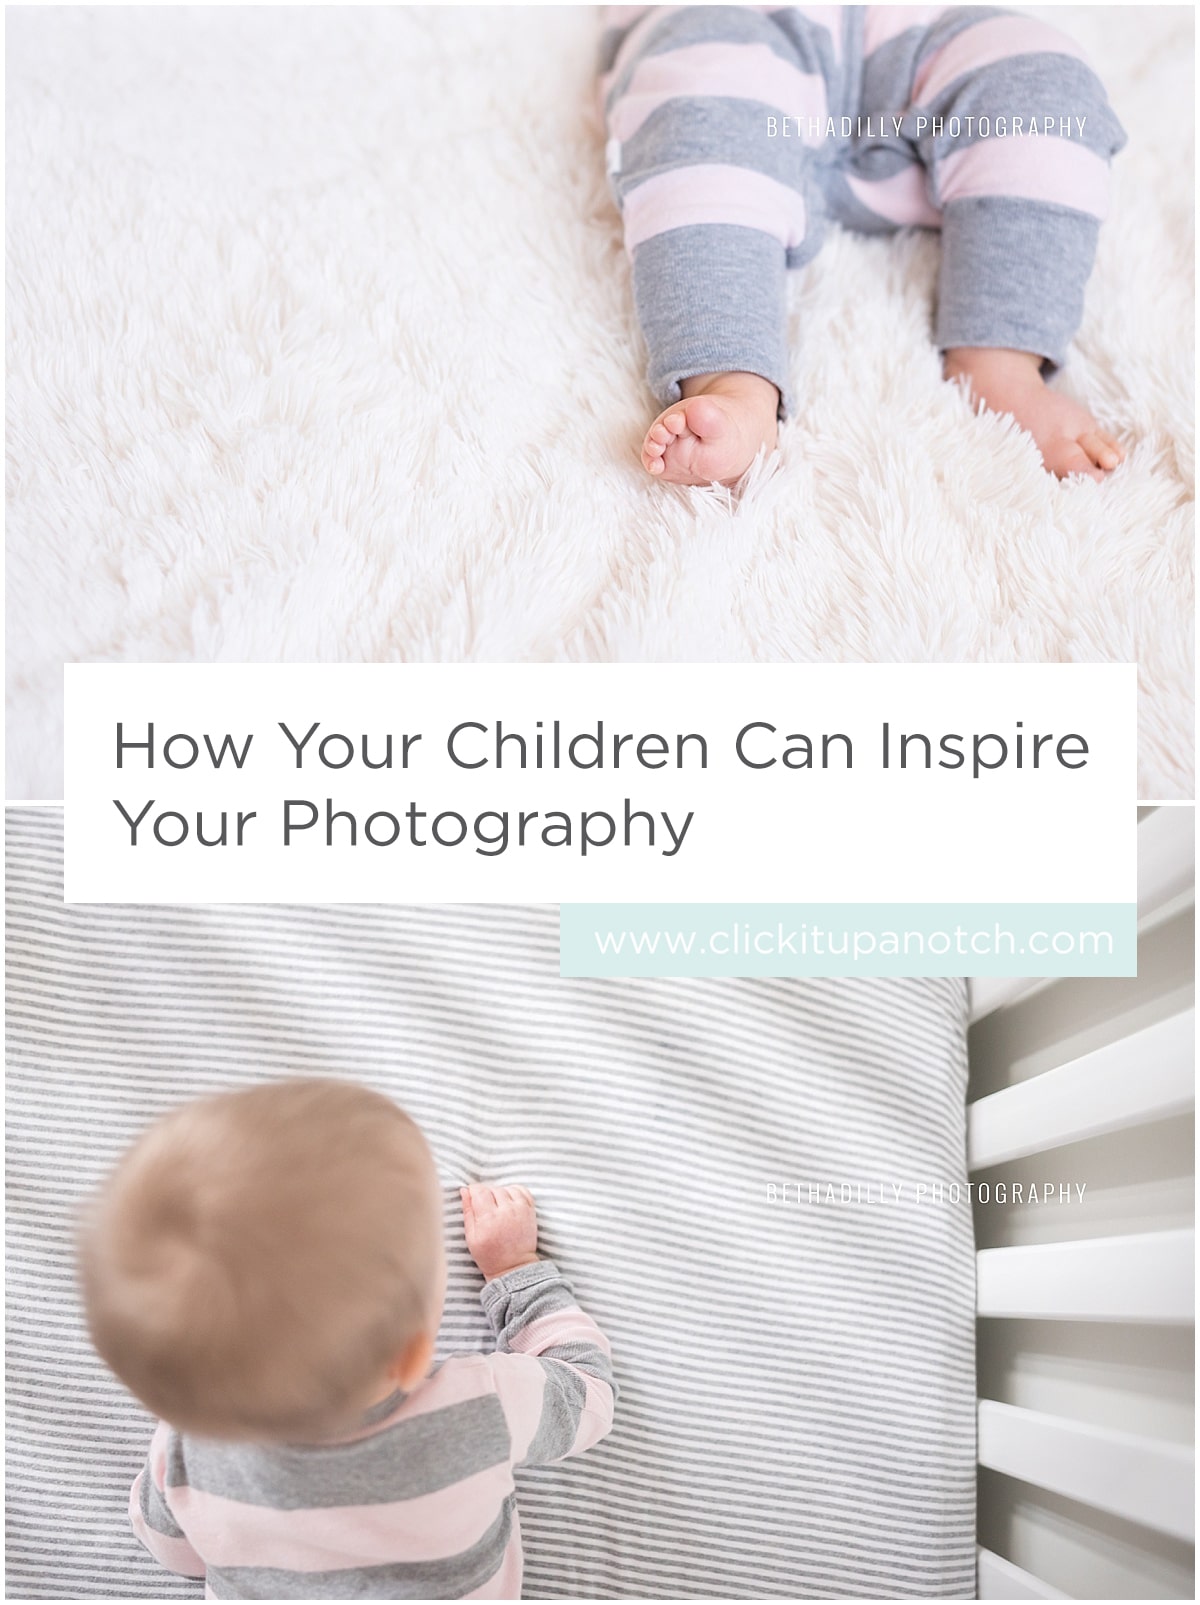 Love this article! This is a great read for moms that are feeling a little uninspired in their photography. Read - "How Your Children Can Inspire Your Photography"